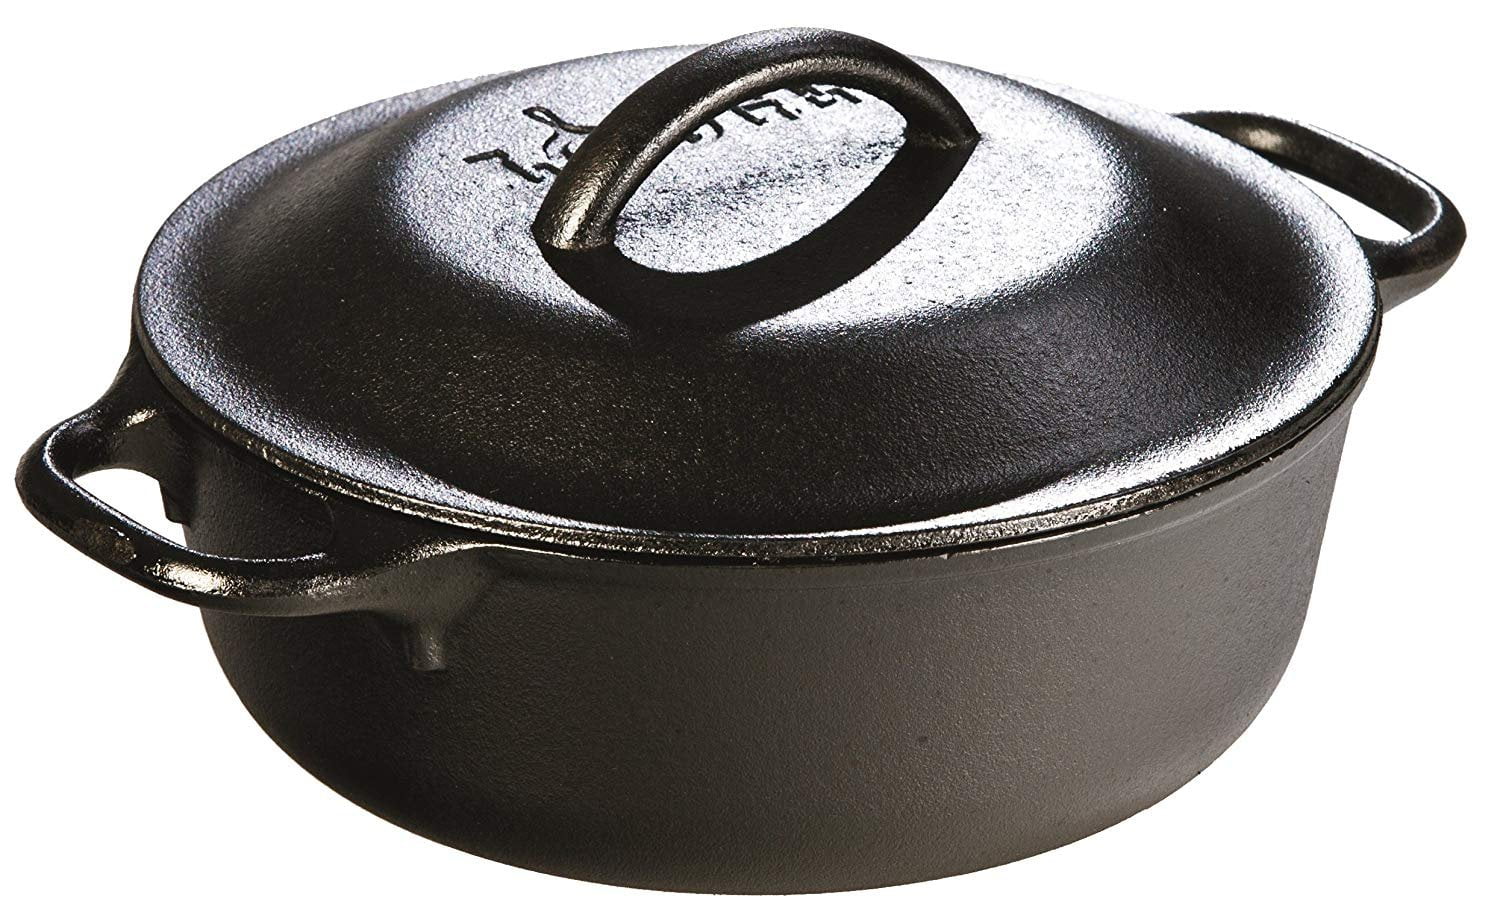 Large for Grilling and Oven Pre-Seasoned Heavy Duty Construction Cast Iron Basting Pot Black